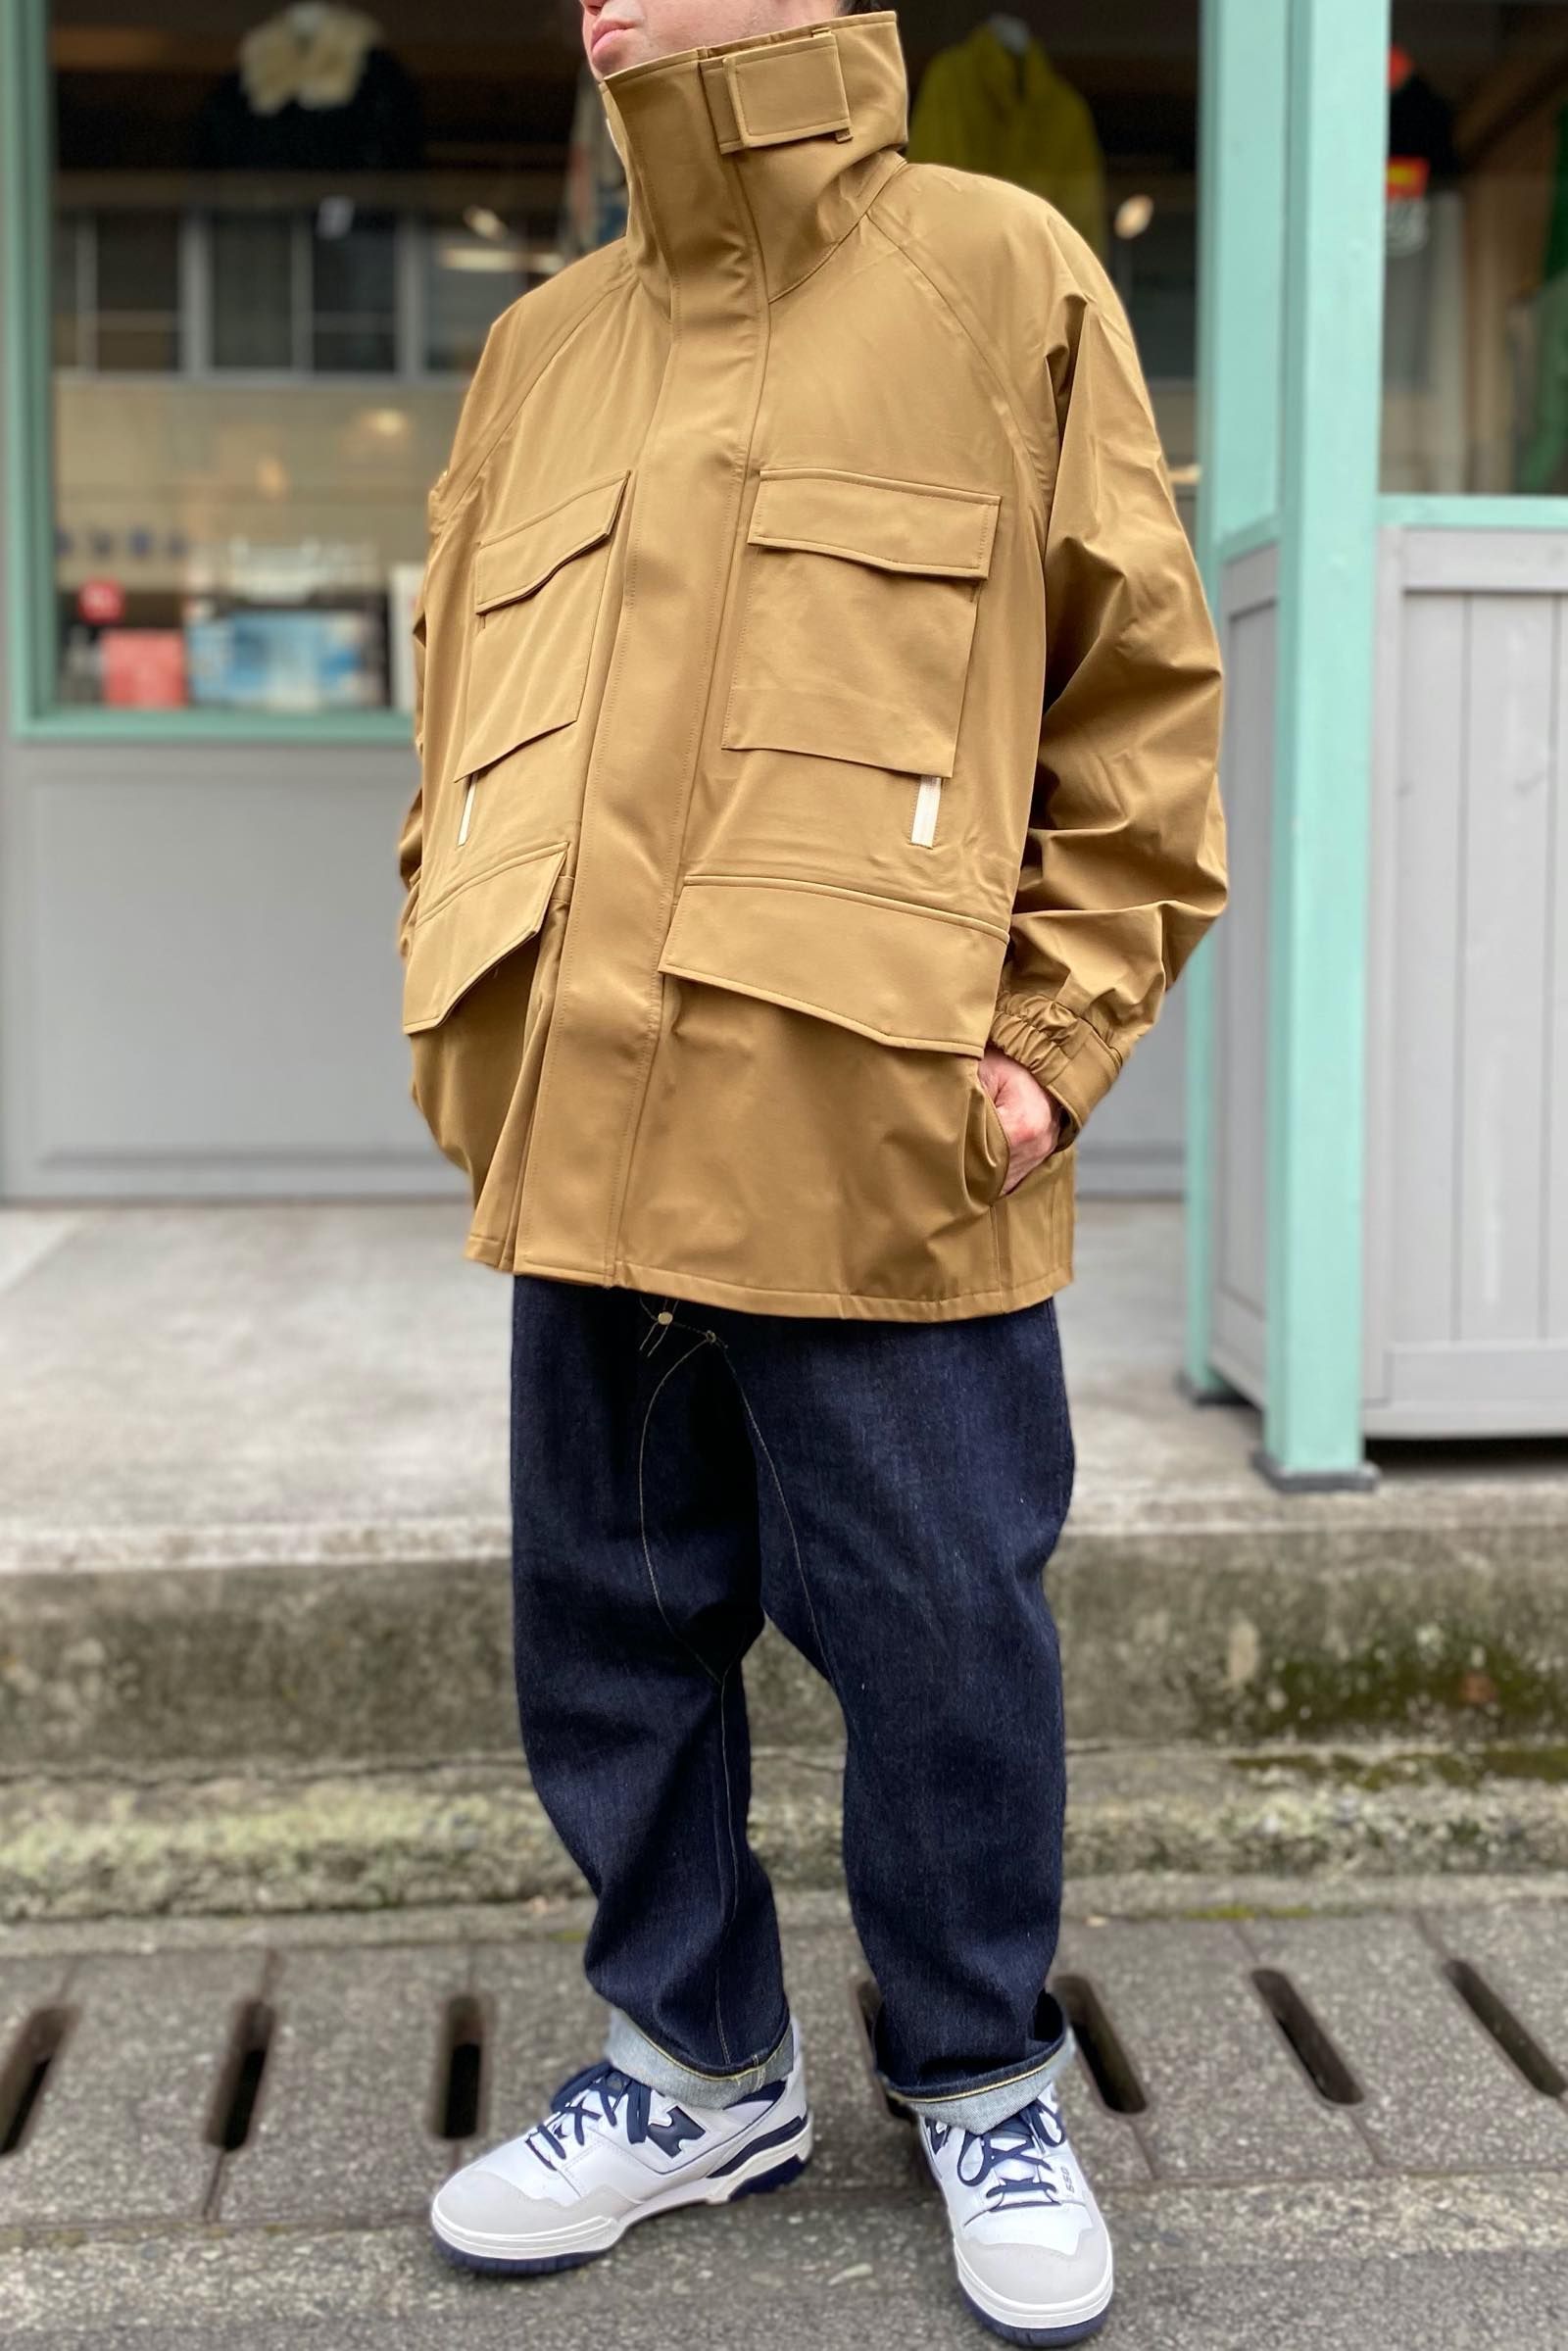 is-ness - the holy mountain jacket 21aw | asterisk